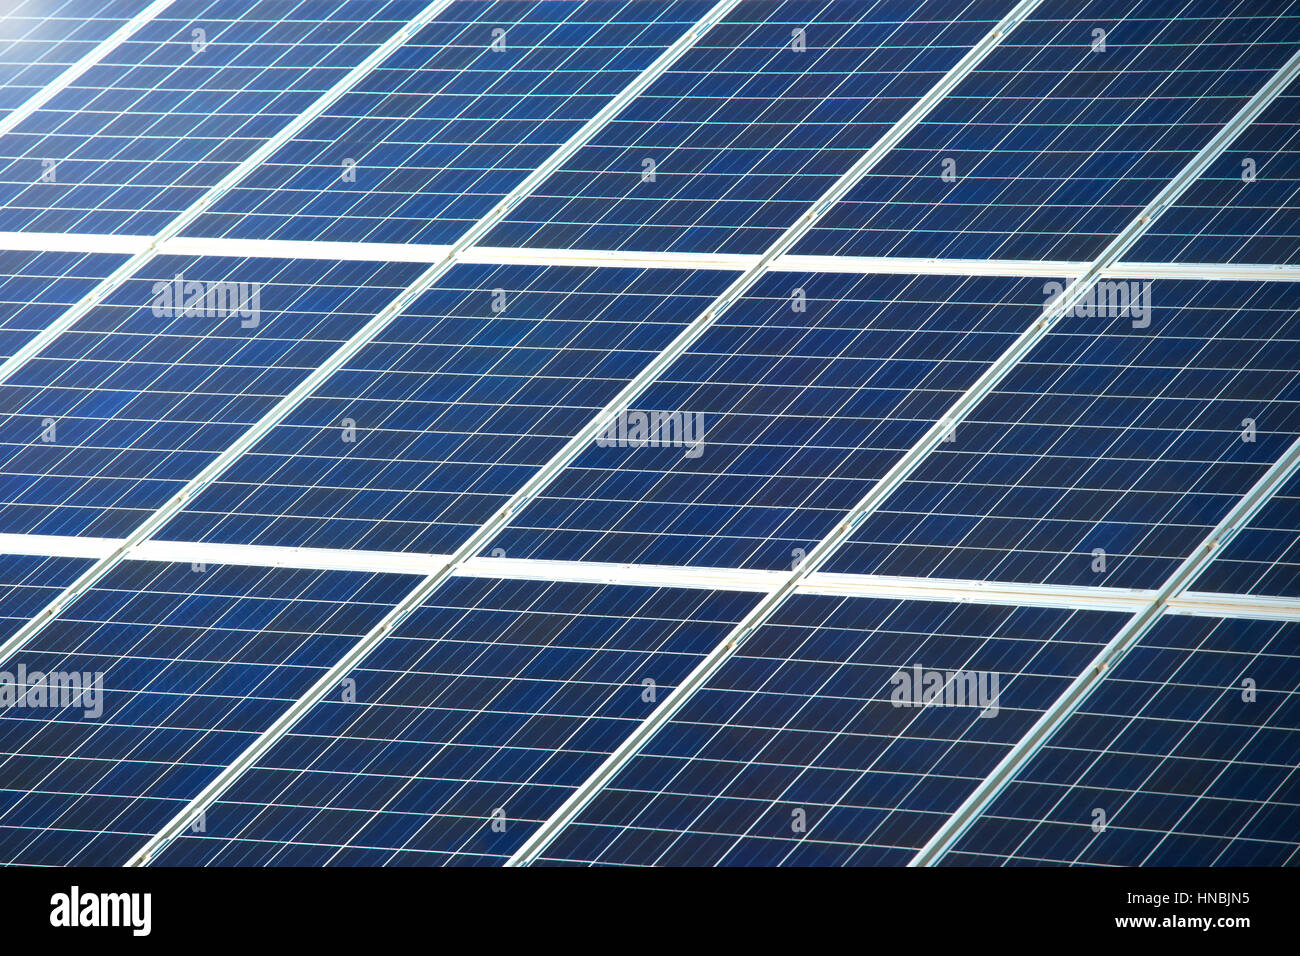 Photovoltaic panel or pv for solar power generation texture or pattern Stock Photo